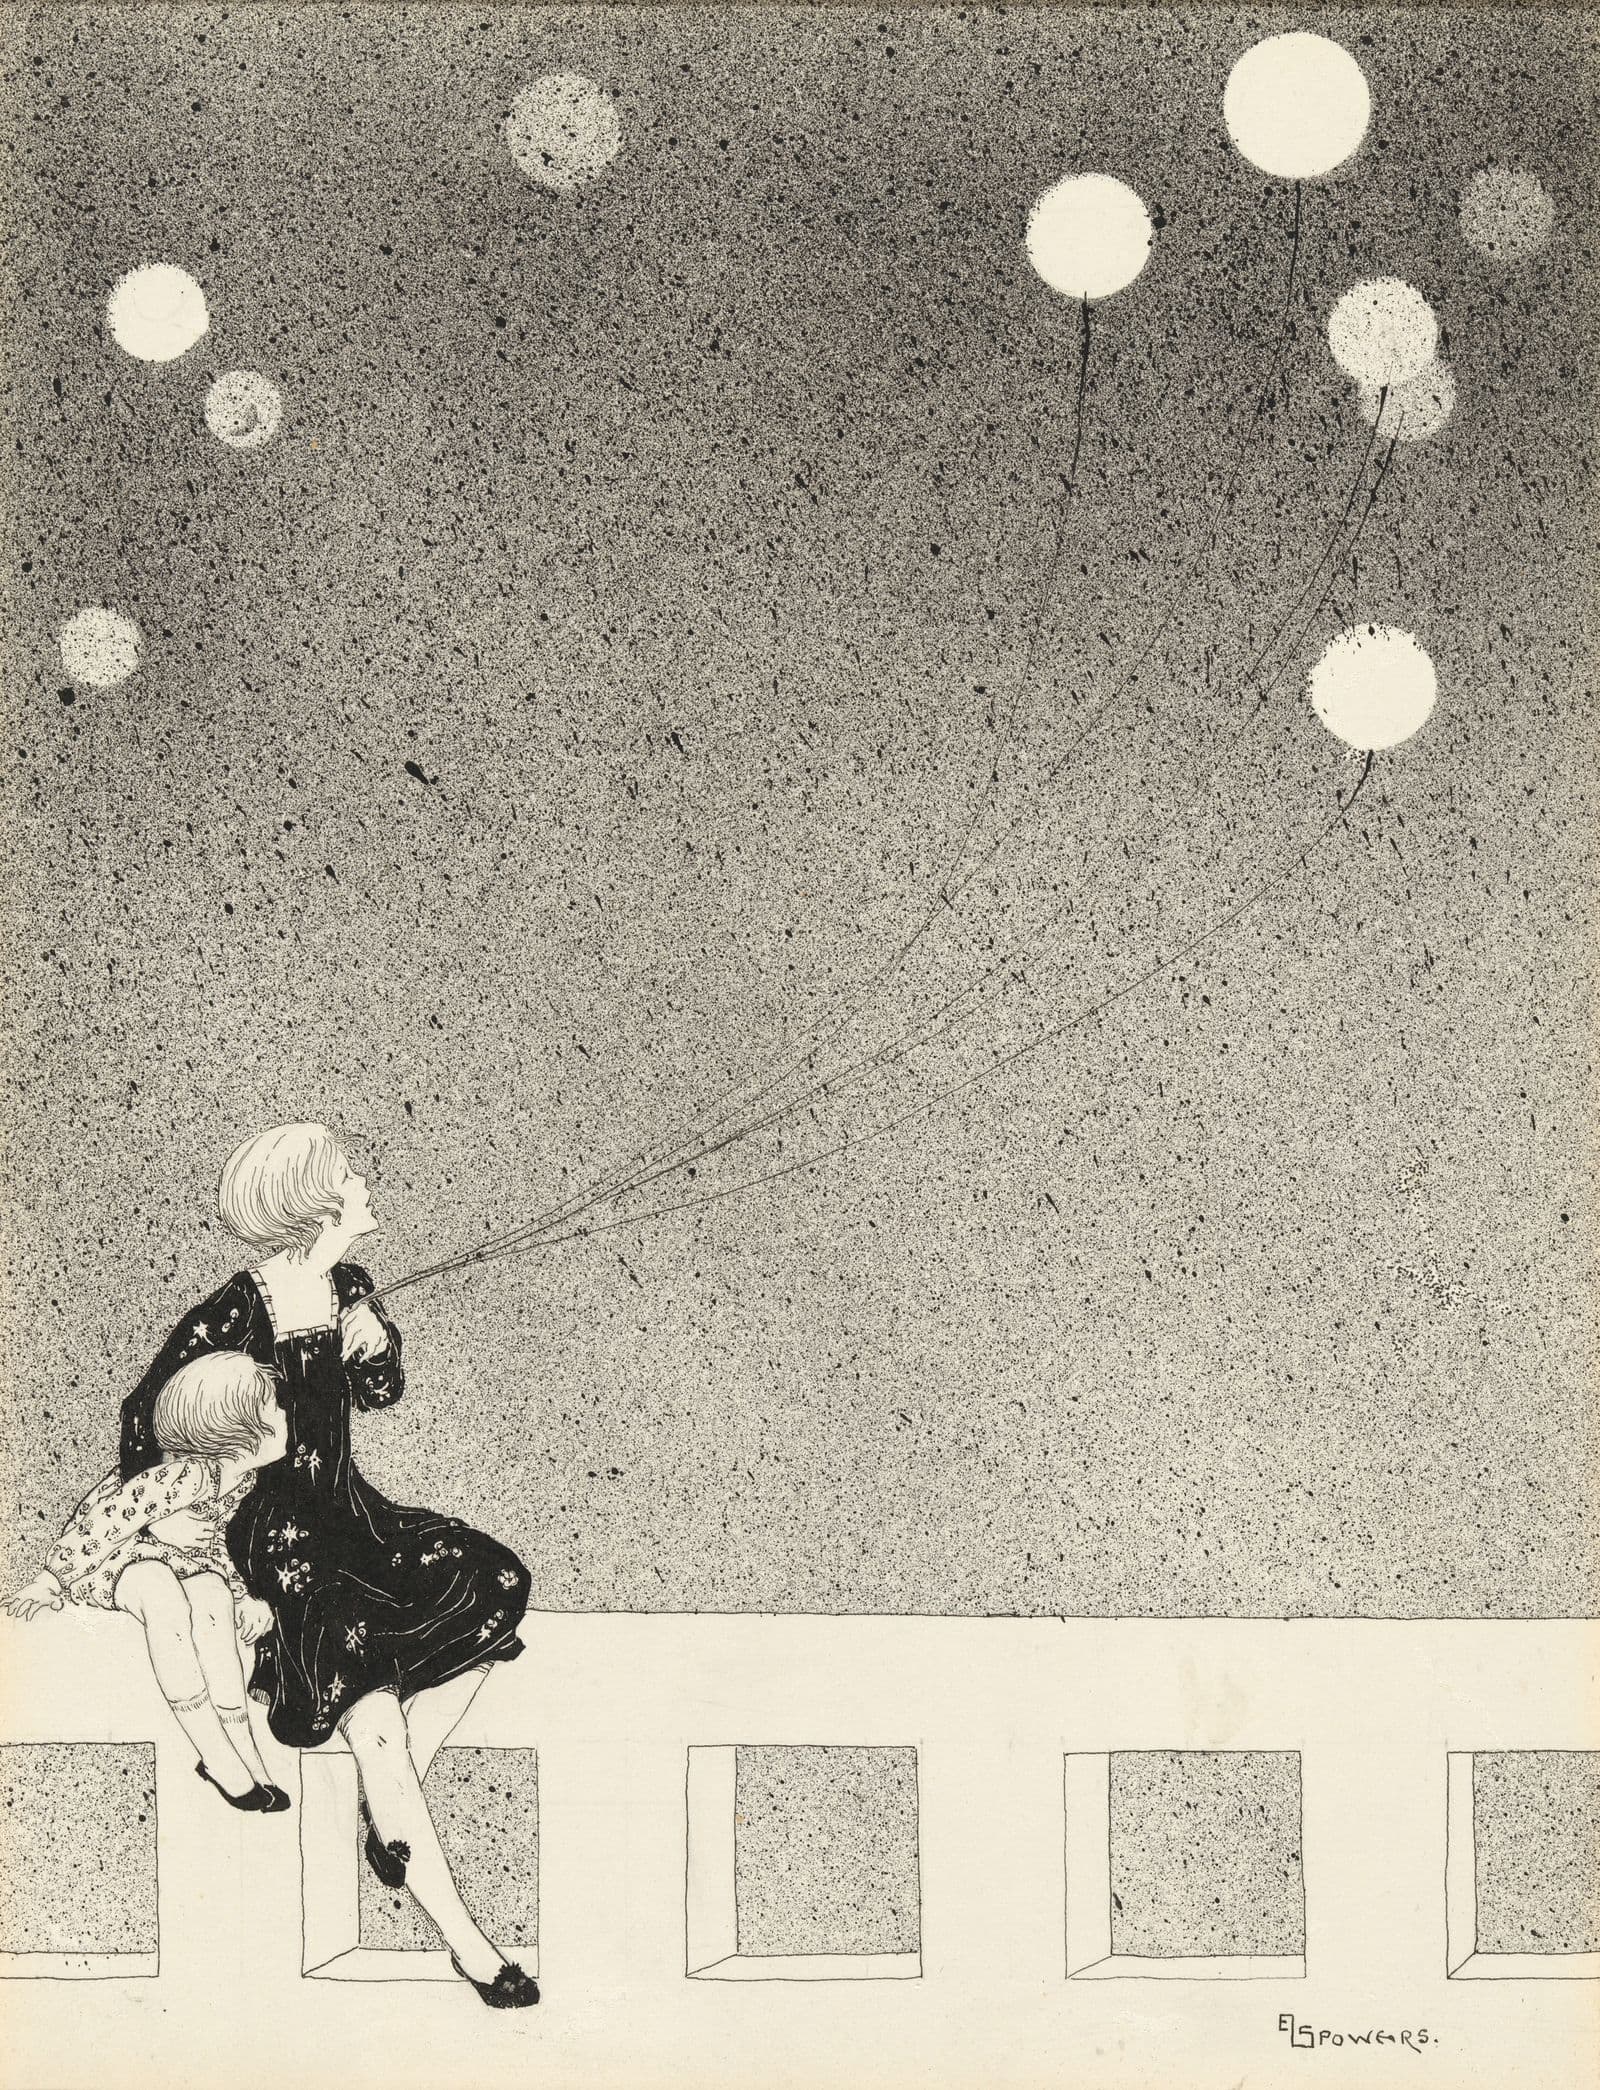 A black and white drawing of a woman and child watching several balloons floating in the air